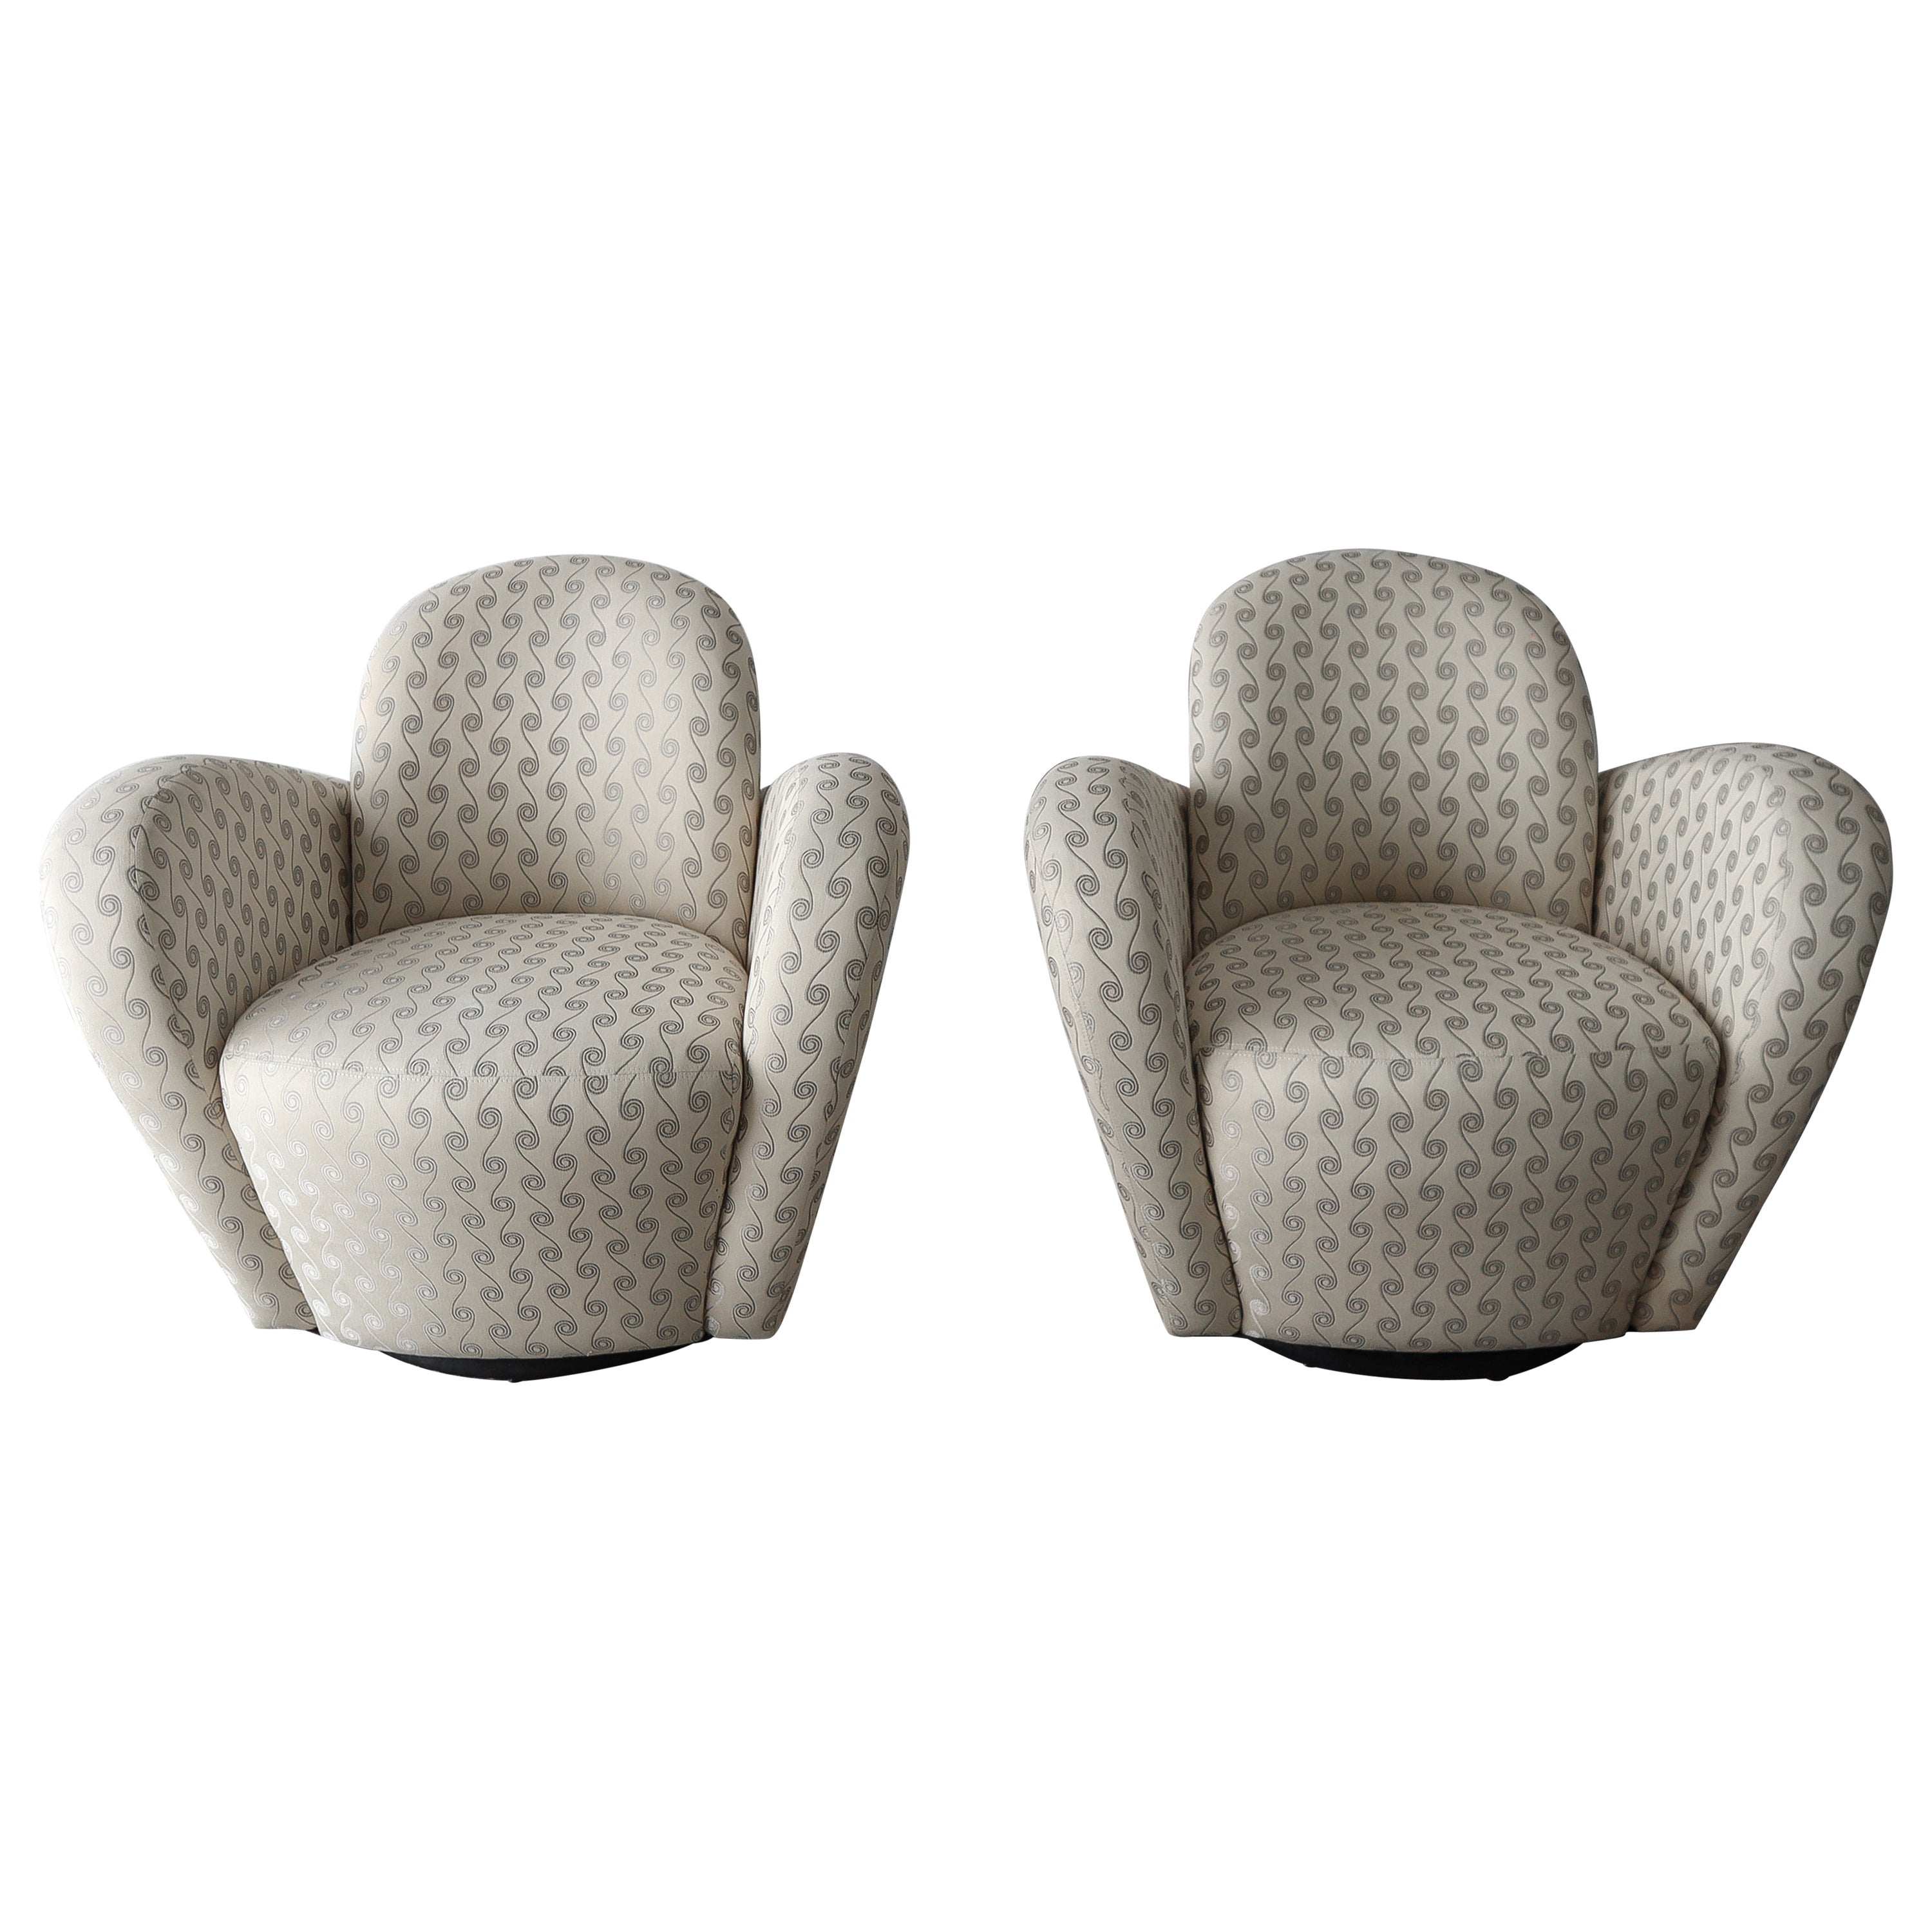 Pair of Post Modern Swivel Chairs by Michael Wolk